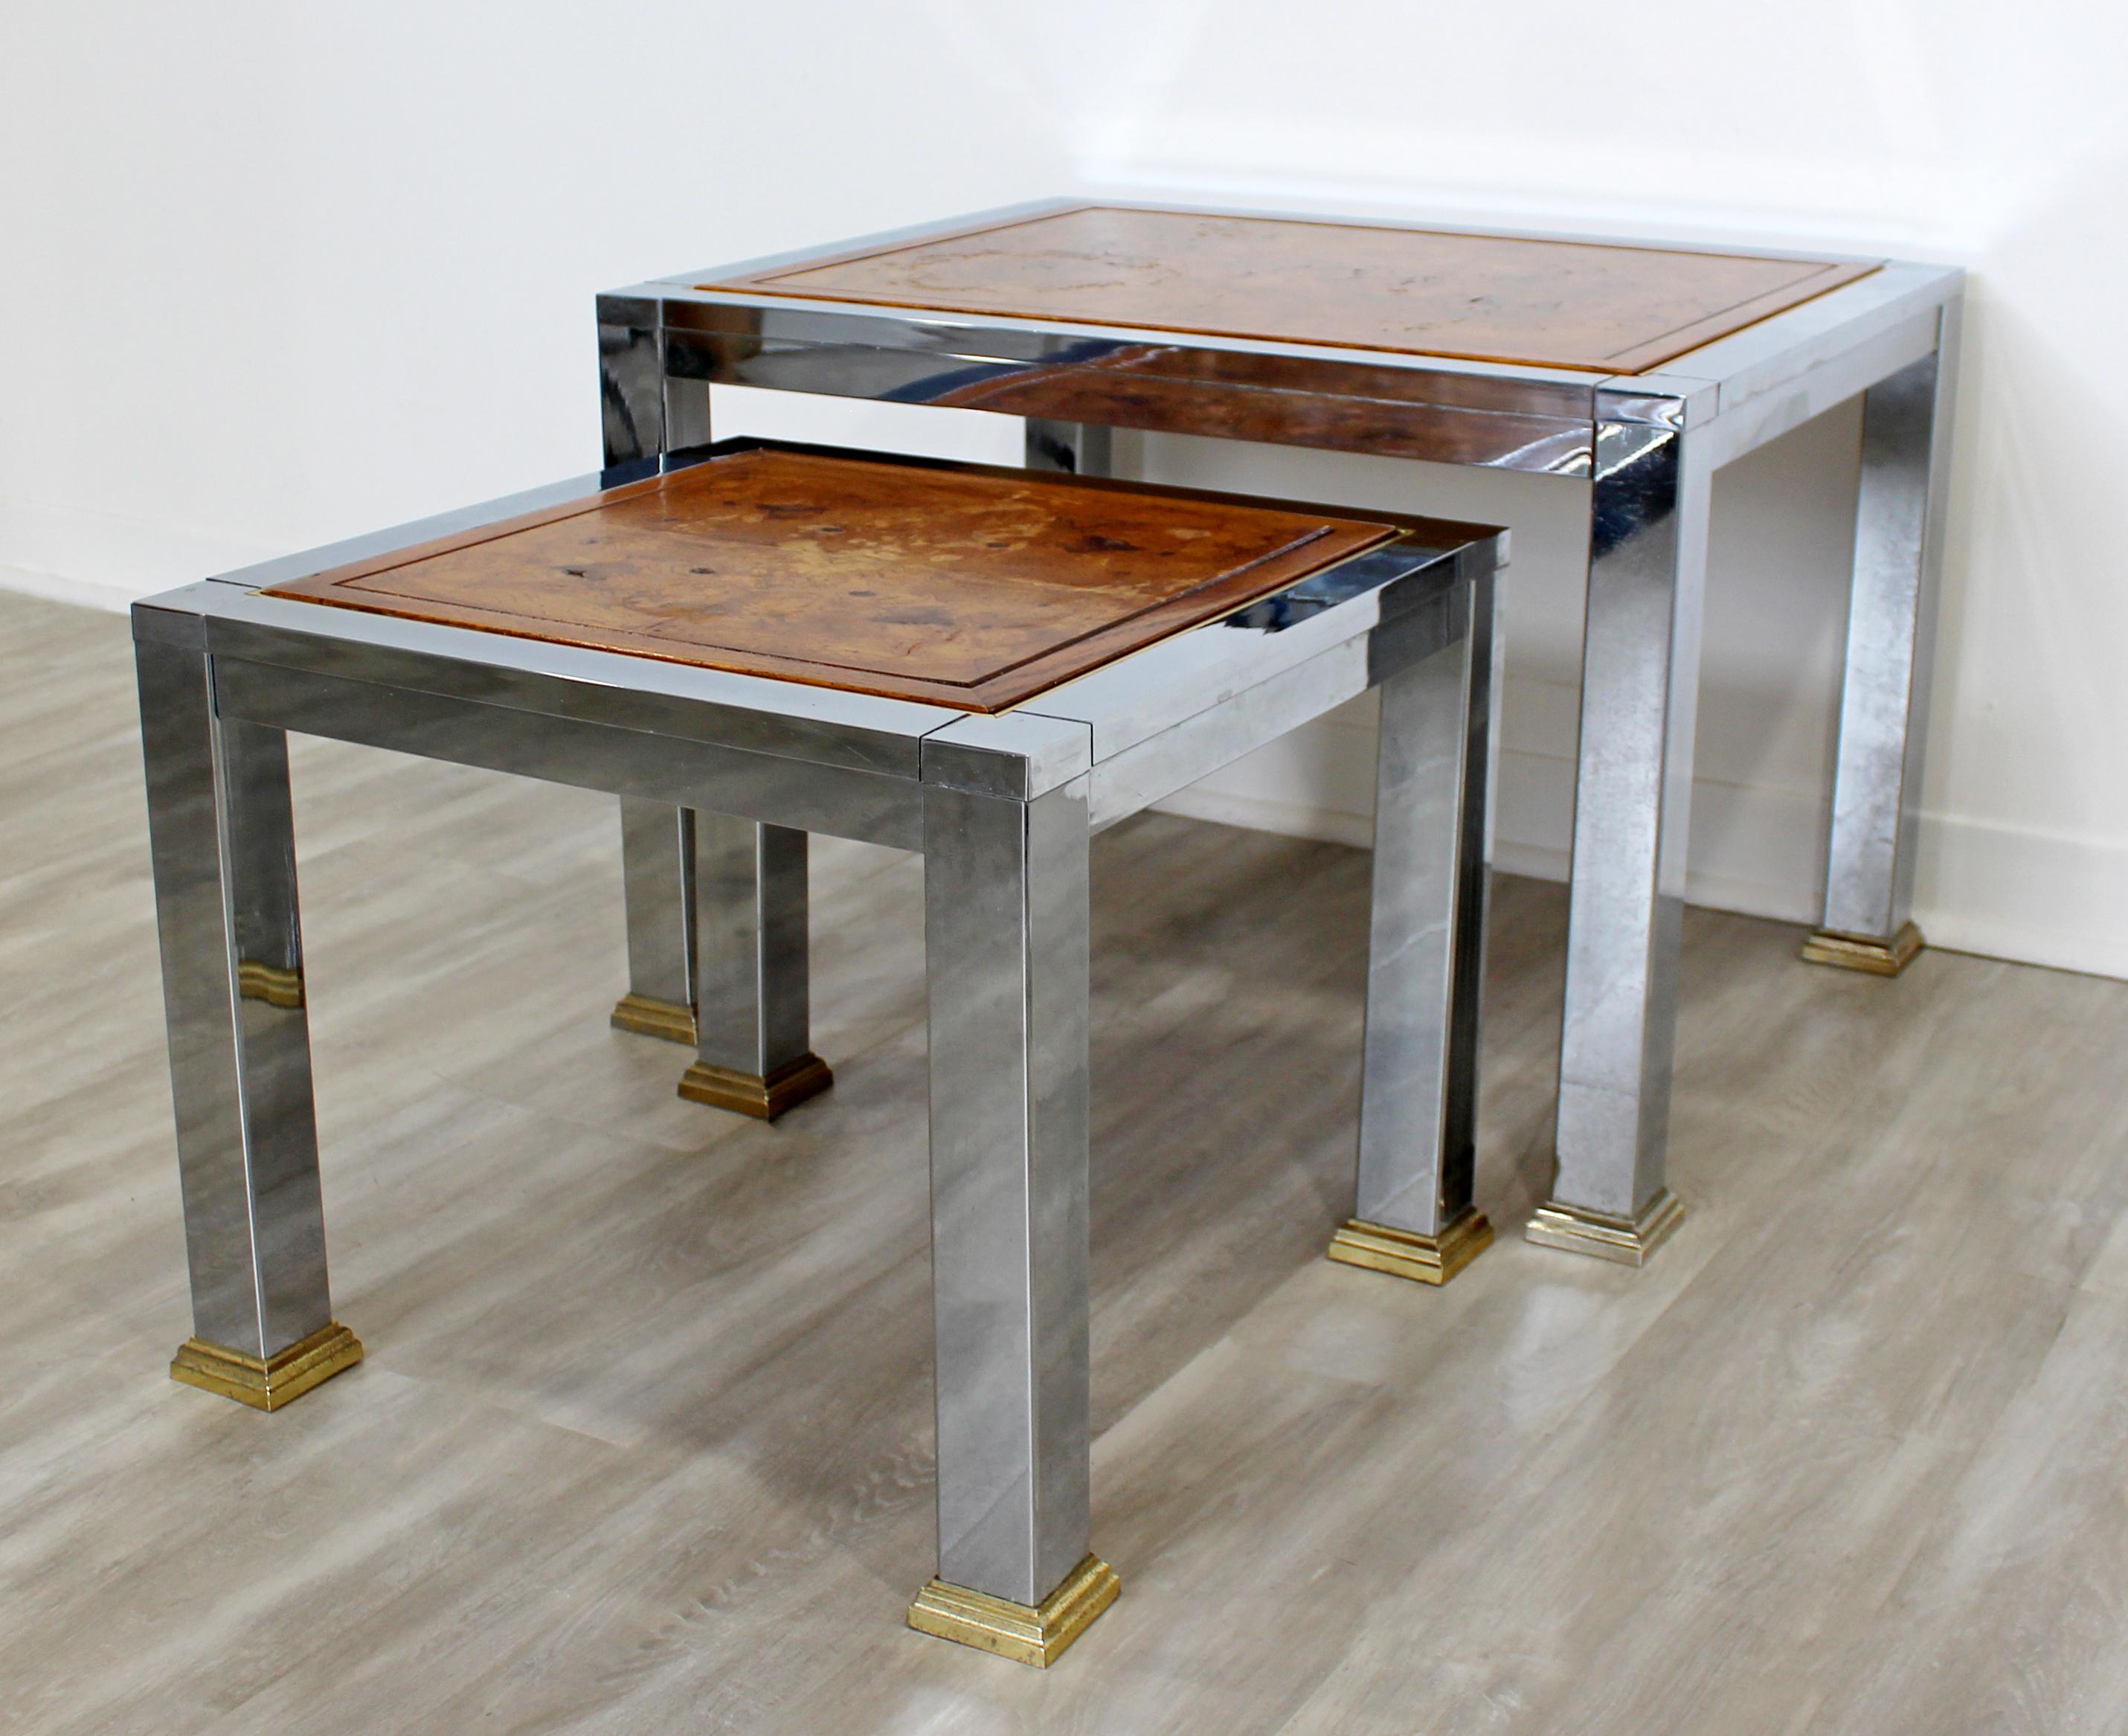 For your consideration is a stupendous pair of stacked nesting tables, made of chrome and brass and with burl wood top inserts, circa 1960s. In vintage condition. The dimensions are 27.5